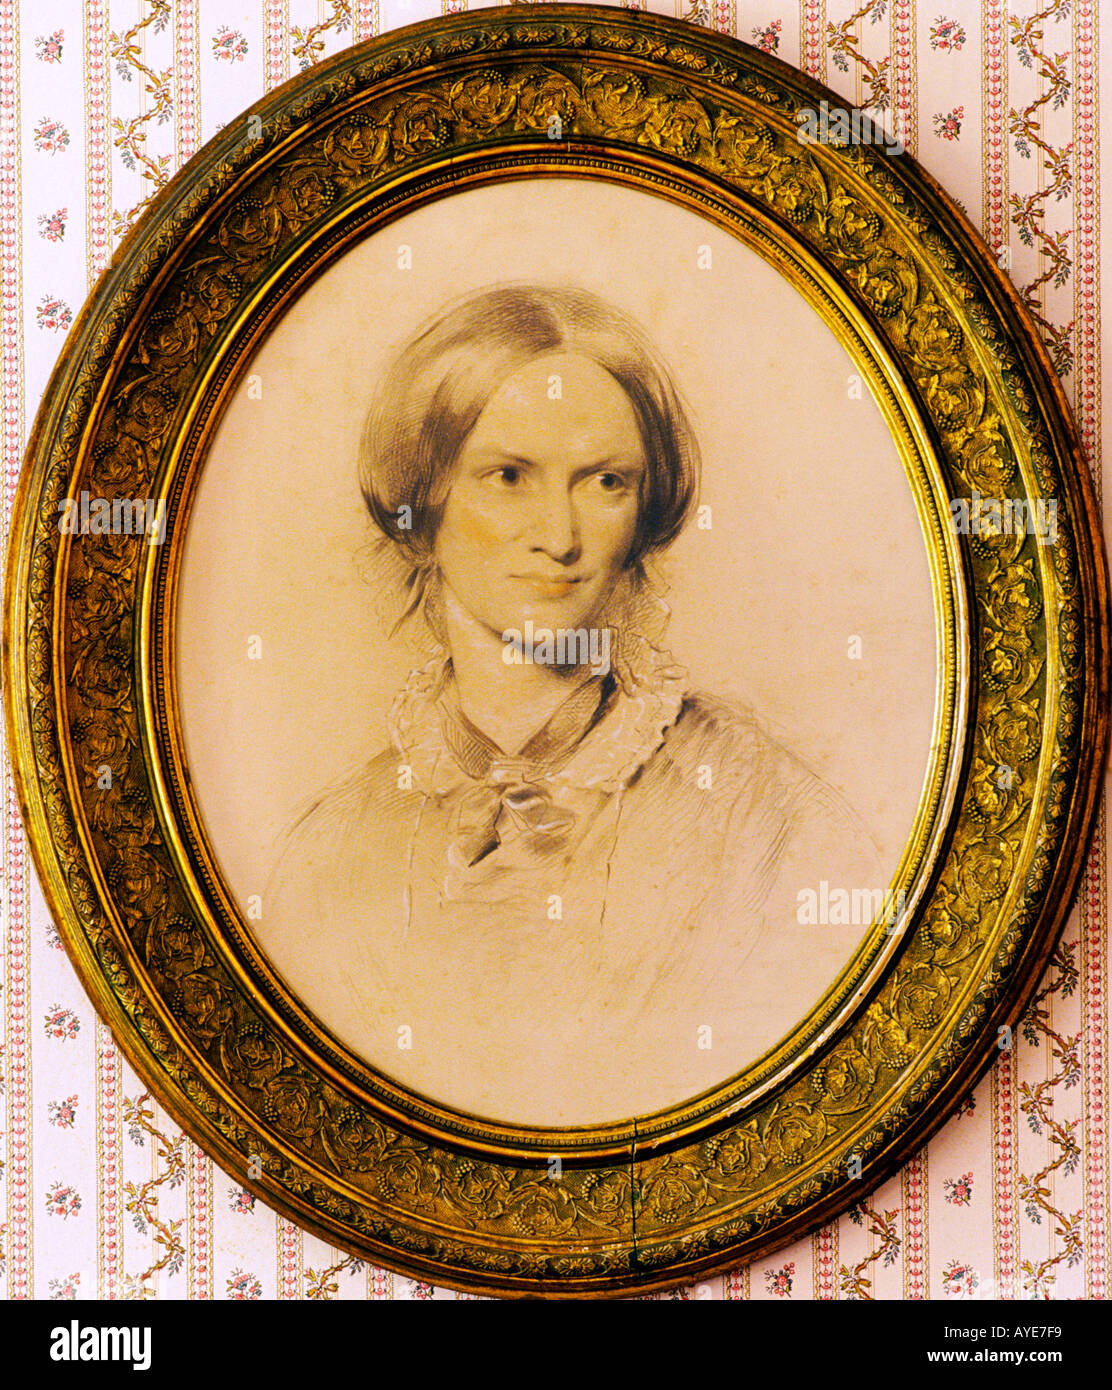 Portrait of Charlotte Bronte, author of Victorian novel Jane Eyre, in her parsonage home in West Yorkshire village of Haworth. Stock Photo